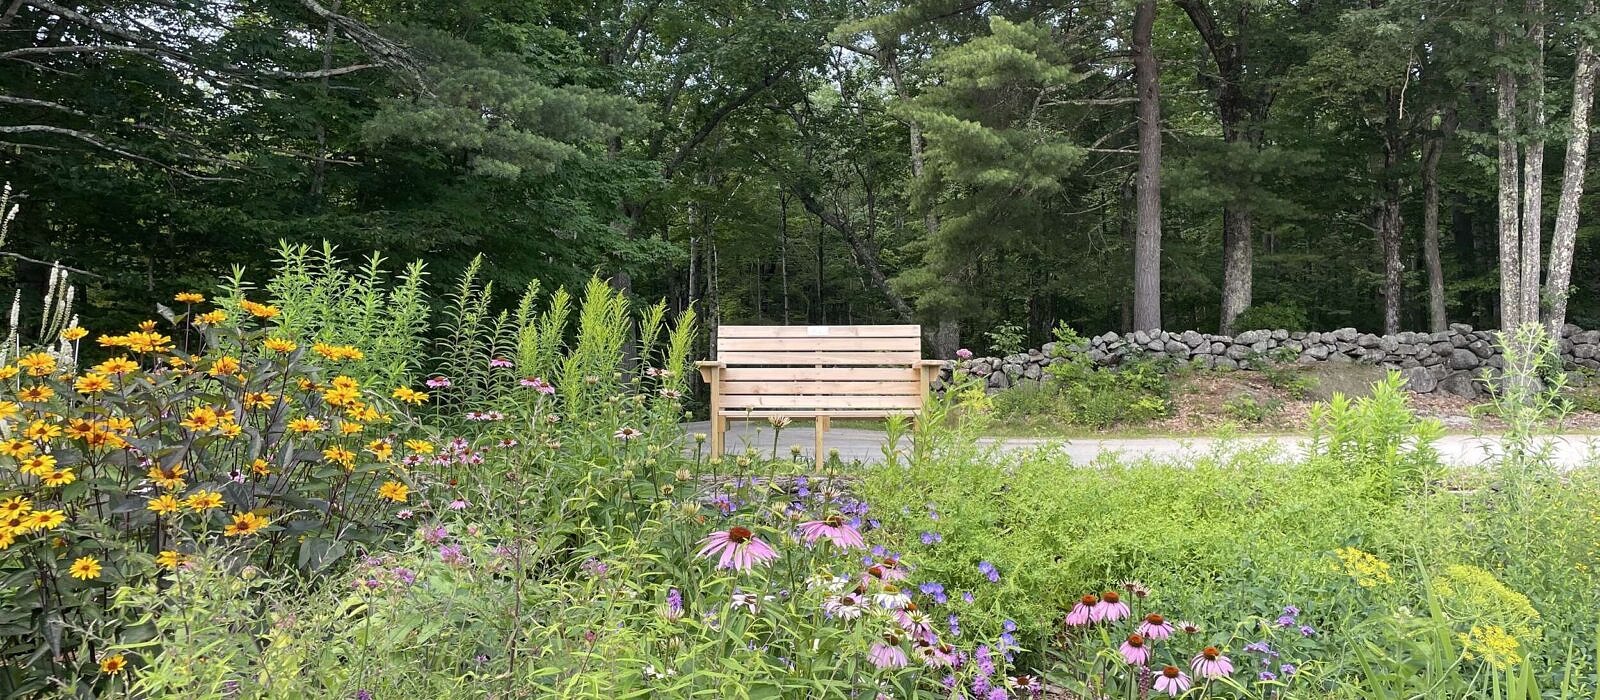 A wooden bench sits in the center of the frame, with green trees in the background, and blooming native plants in the foreground. (photo © Audrey Dunn)